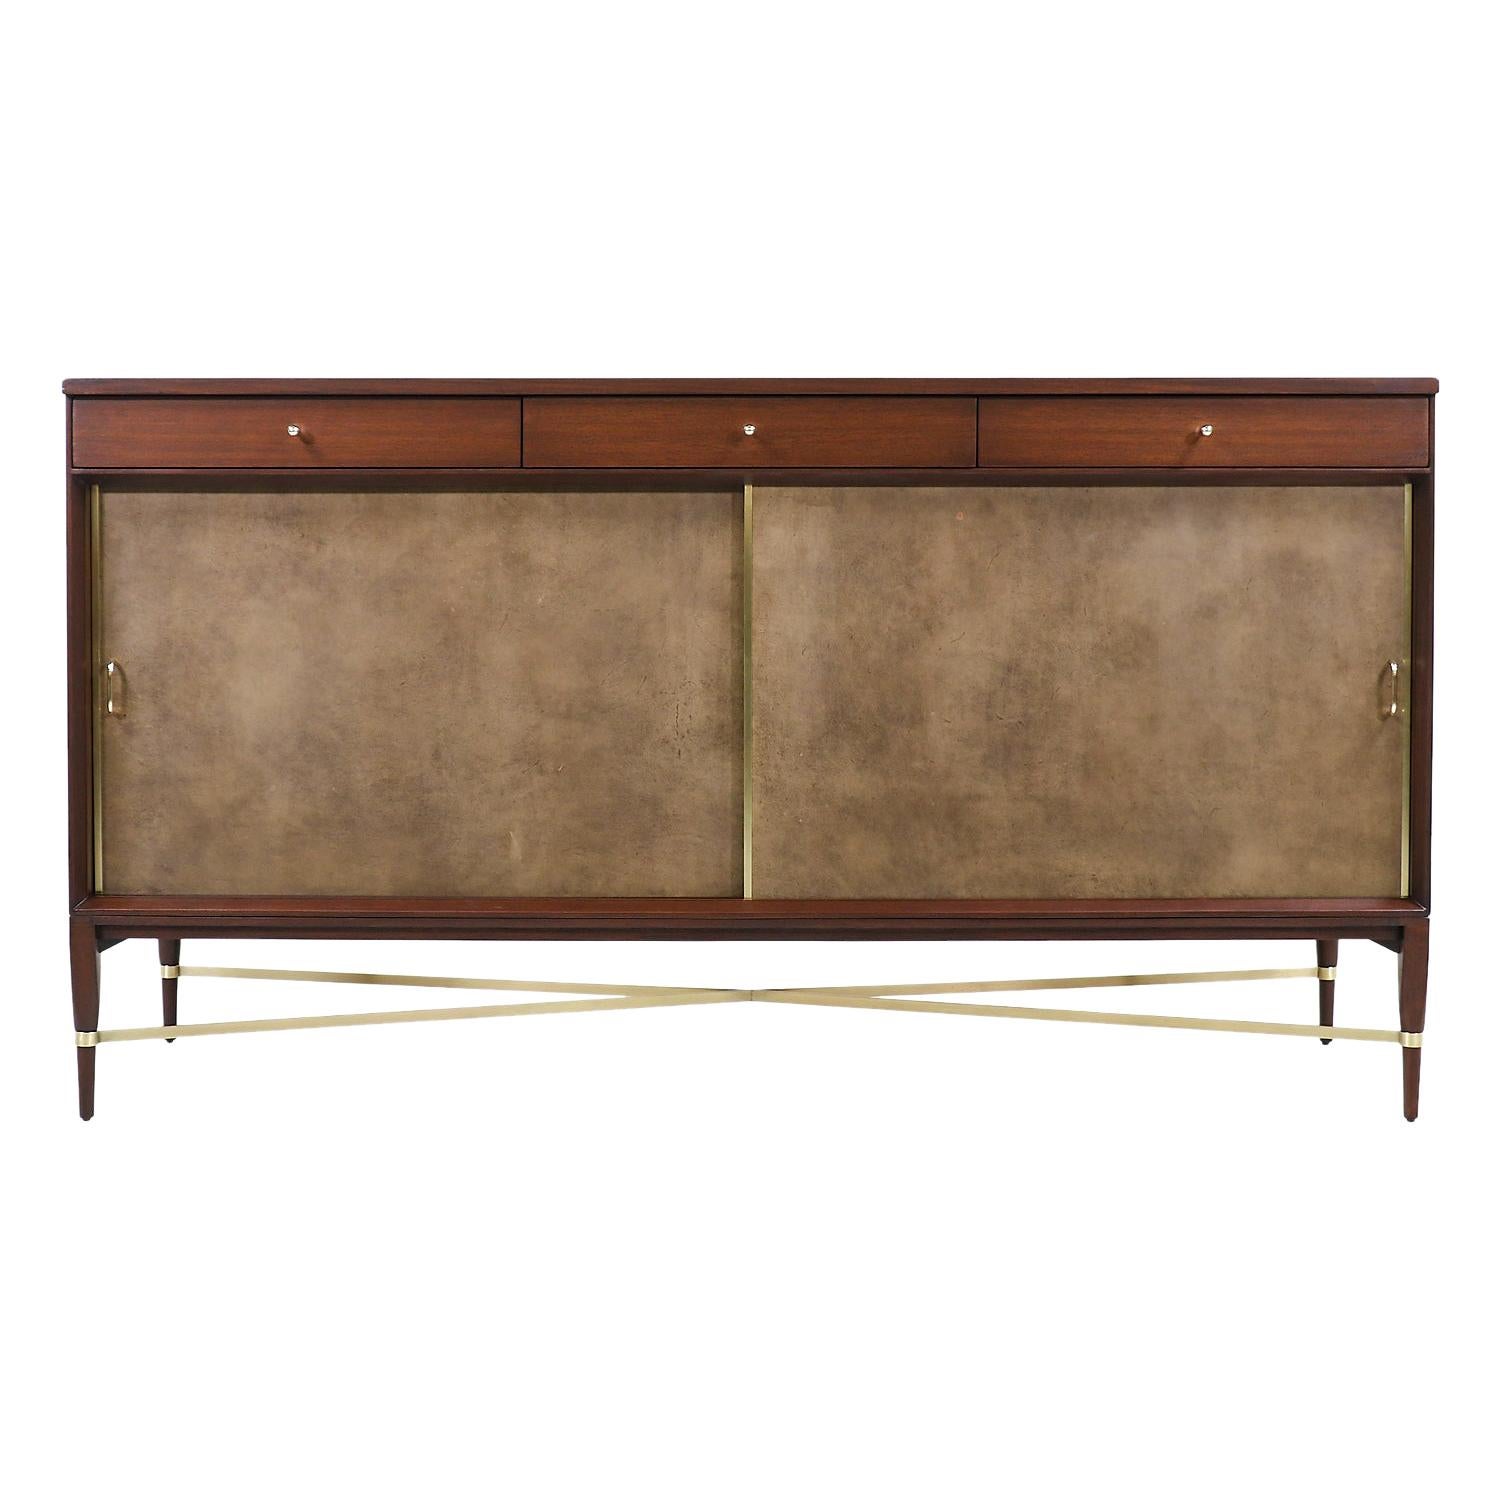 Paul McCobb "Irwin Collection" Credenza with Brass Accents and Leather Doors